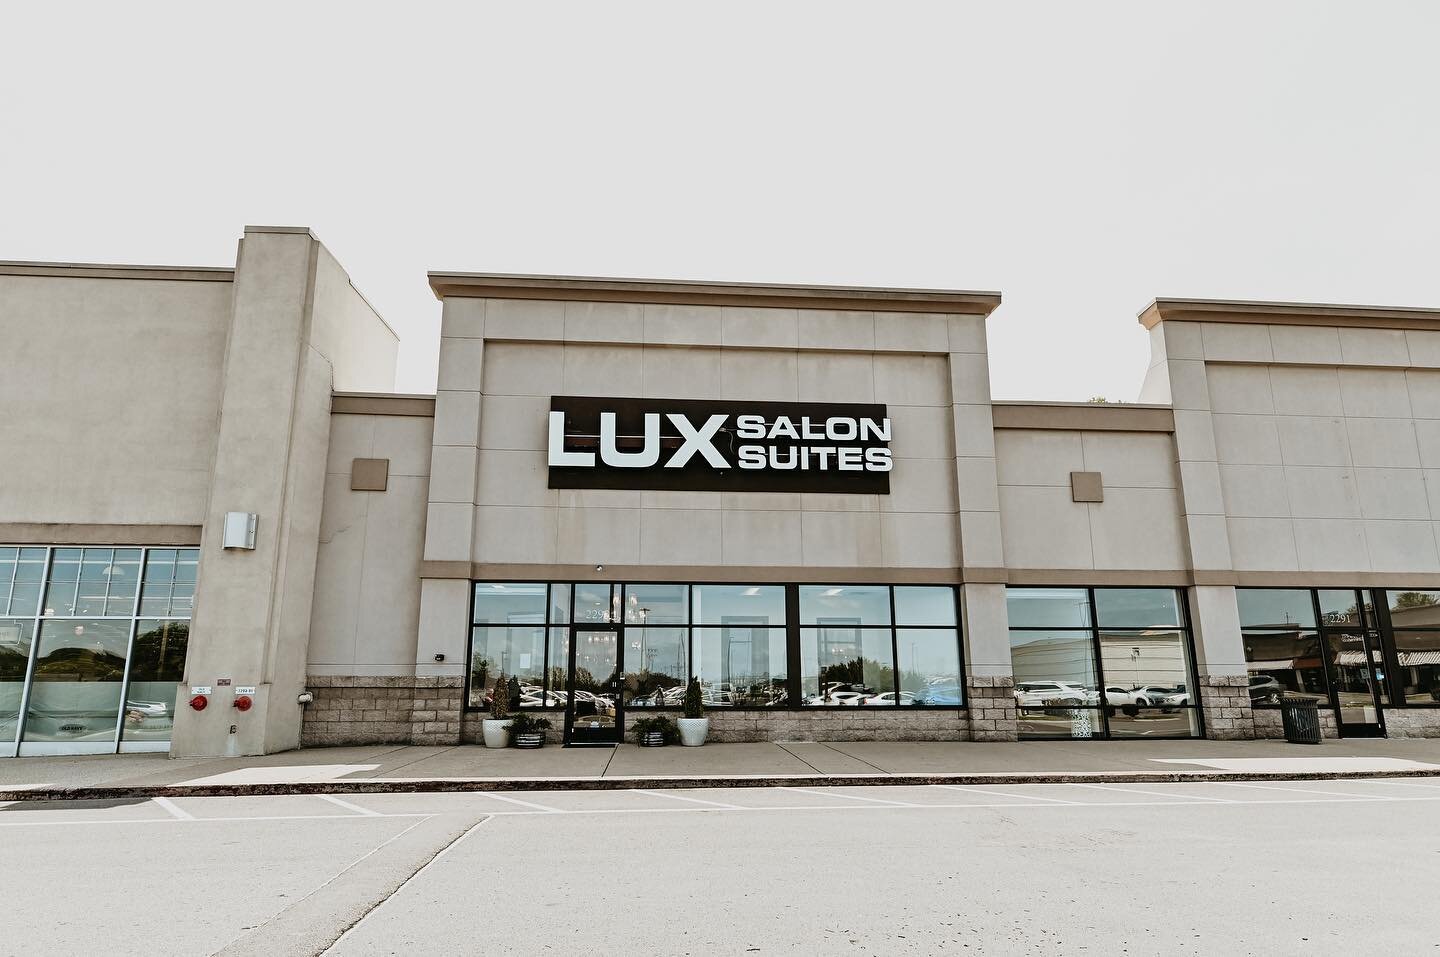 We have beautiful luxury suites available at our Madison, Tn location! Take the next step and call today to schedule a tour! jamiesprott@luxsalonsuites.net
615.857.9300
&bull;
&bull;
&bull;
&bull;
&bull;
&bull;
&bull;
&bull;
#luxsalonsuites #hairstyl